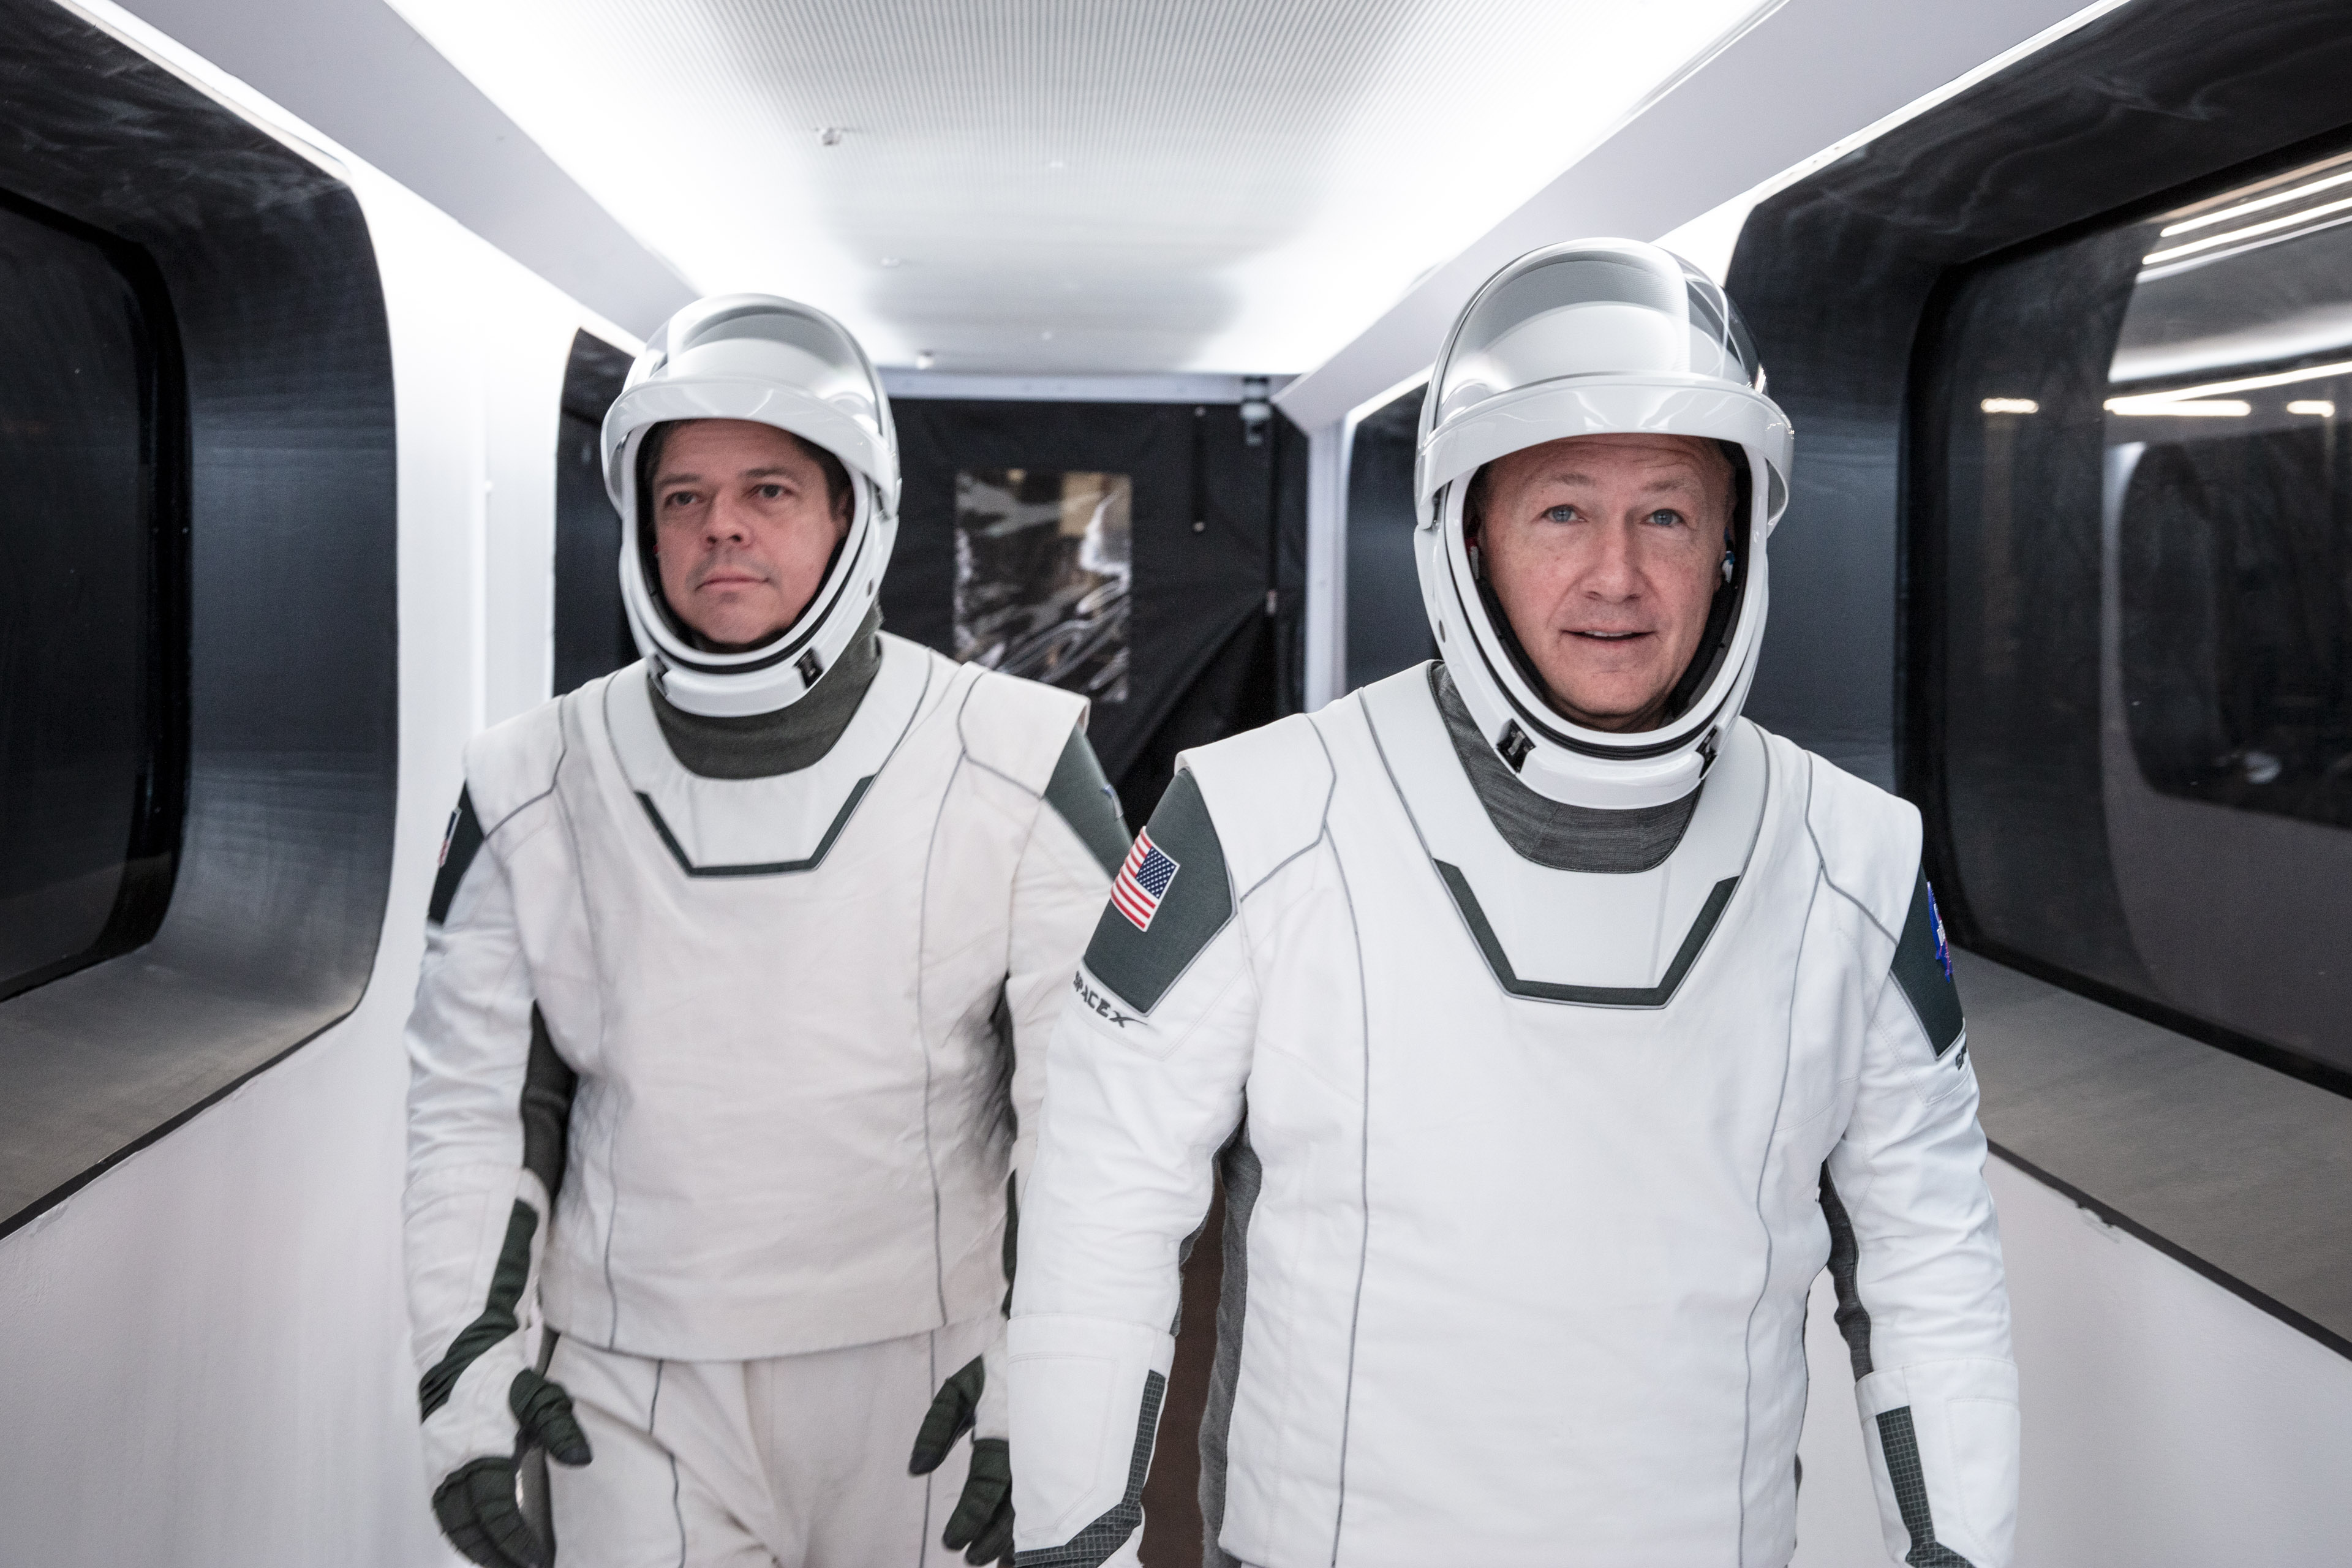 Nasa astronauts Bob Behnken and Doug Hurley in their SpaceX spacesuits